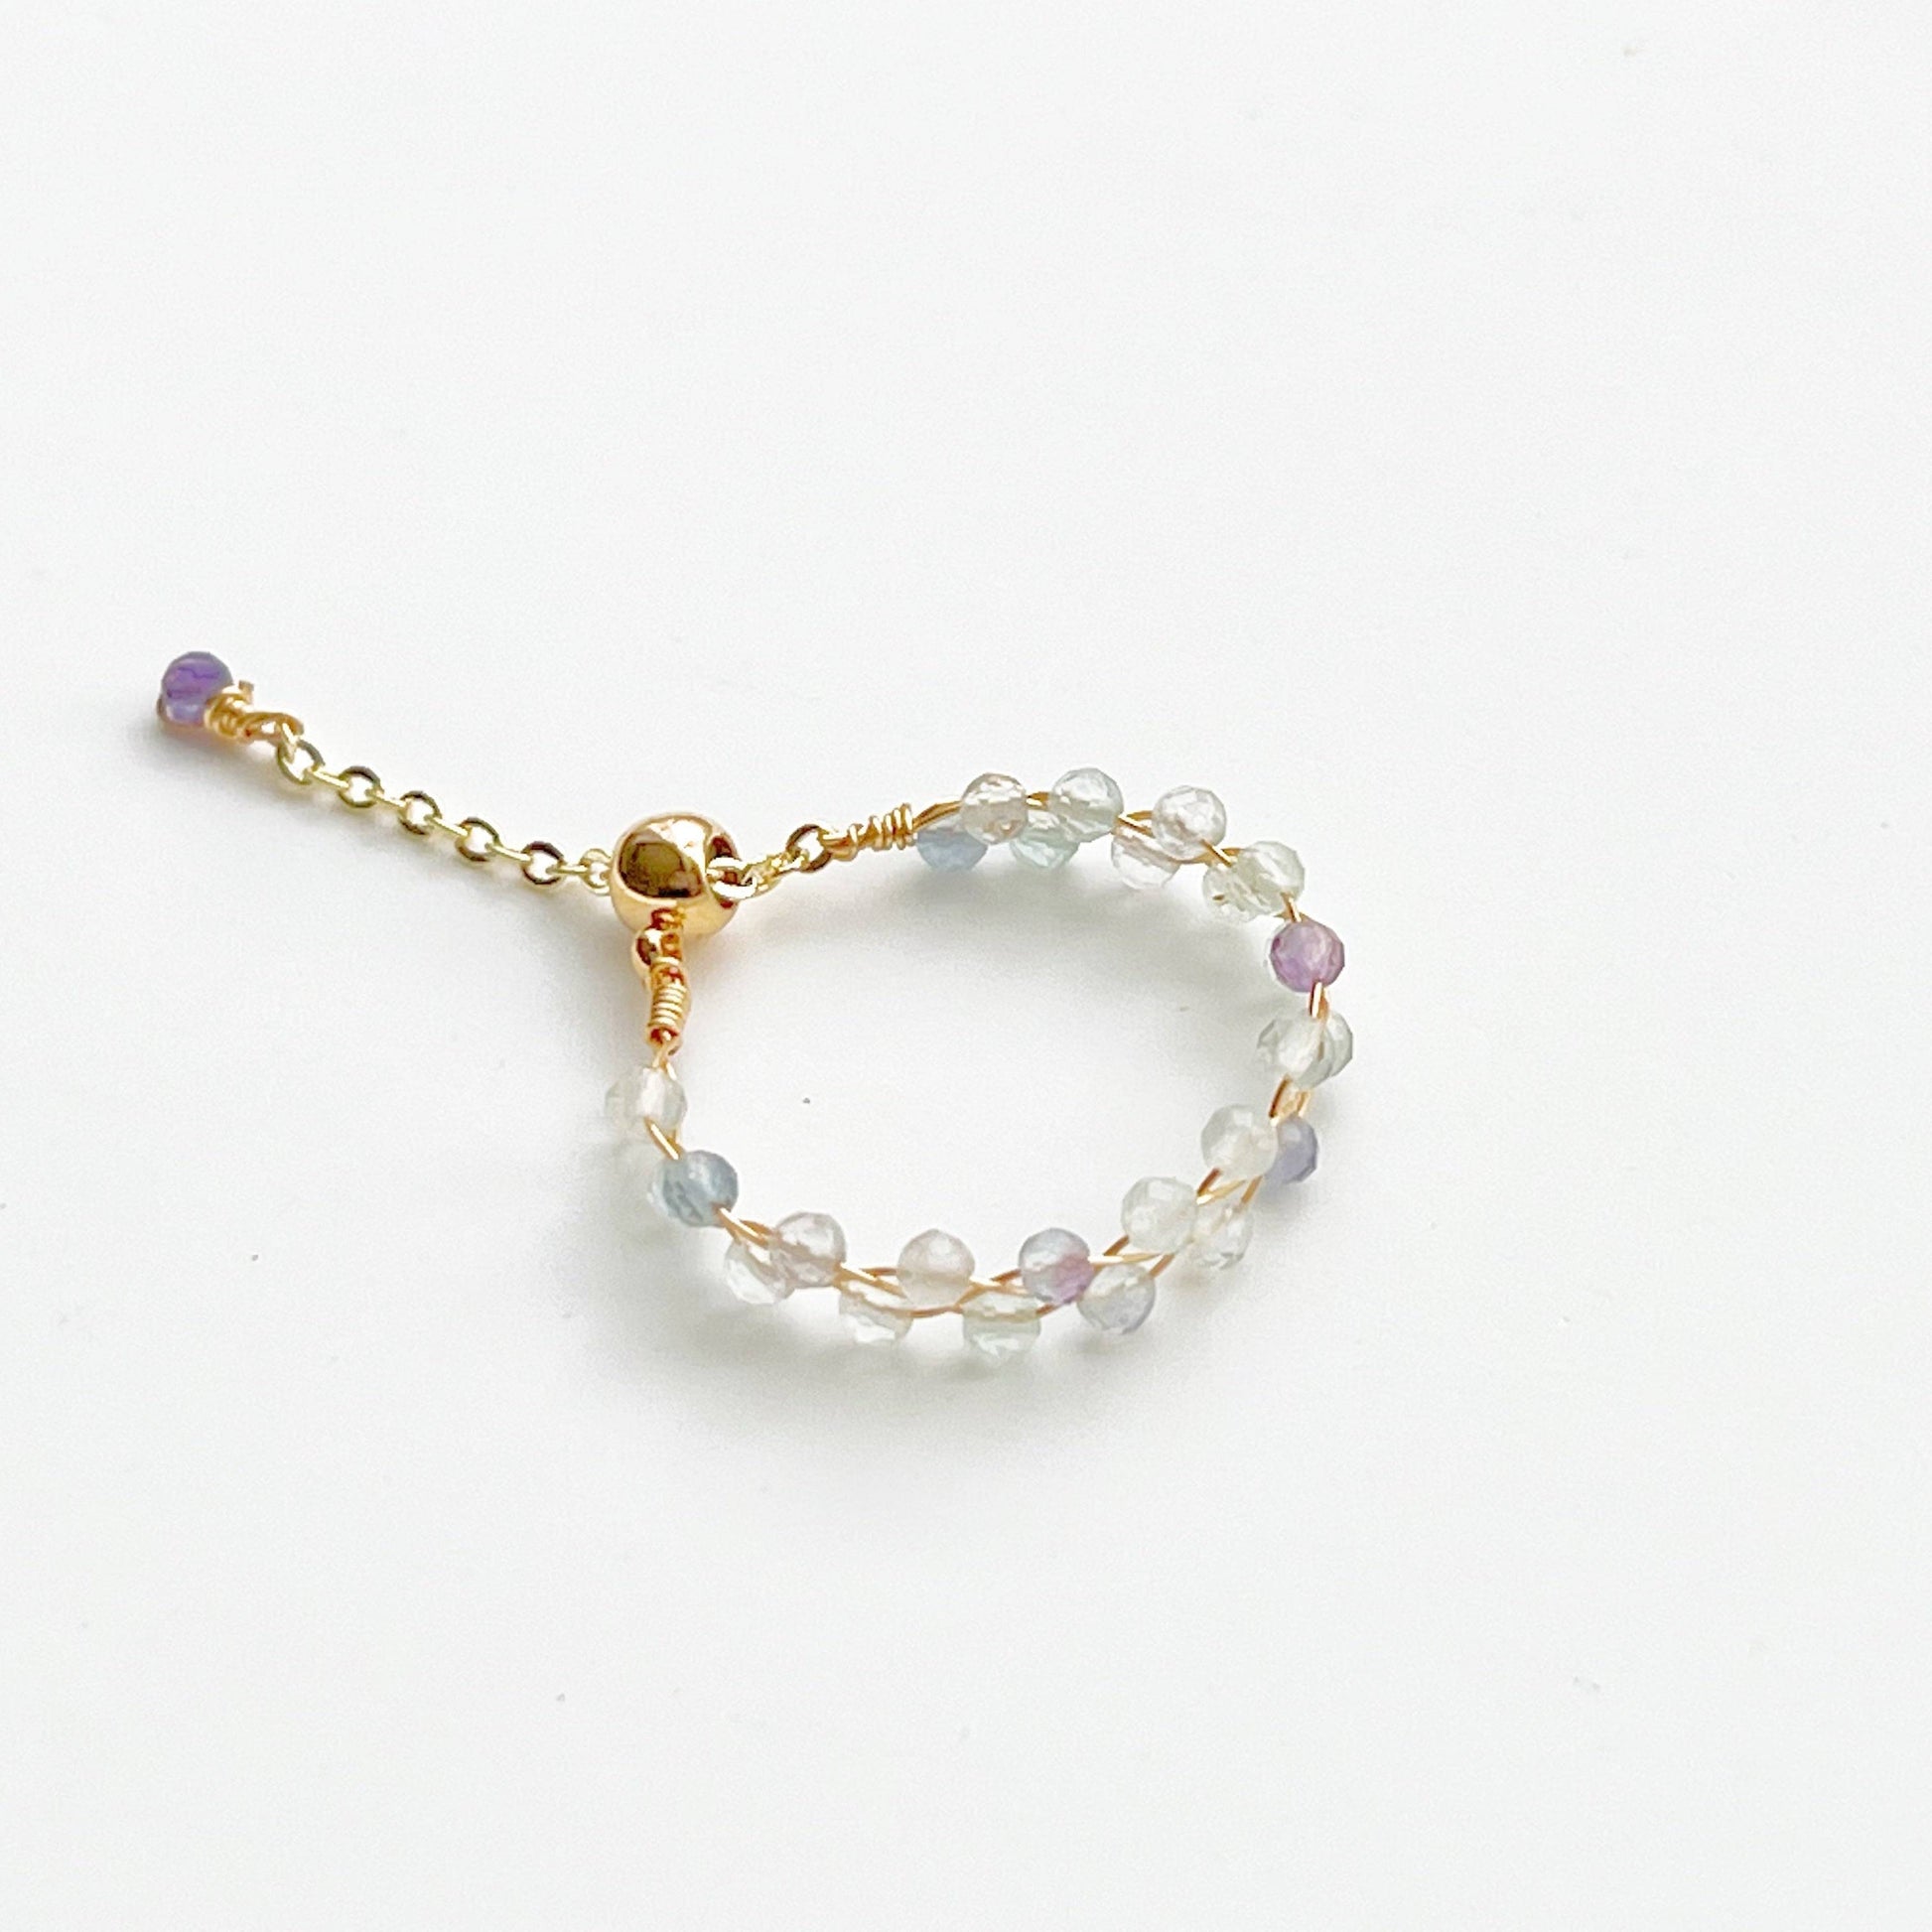 Fluorite Crystal Ring - Natural Stone Beads Adjustable Ring-Ninaouity